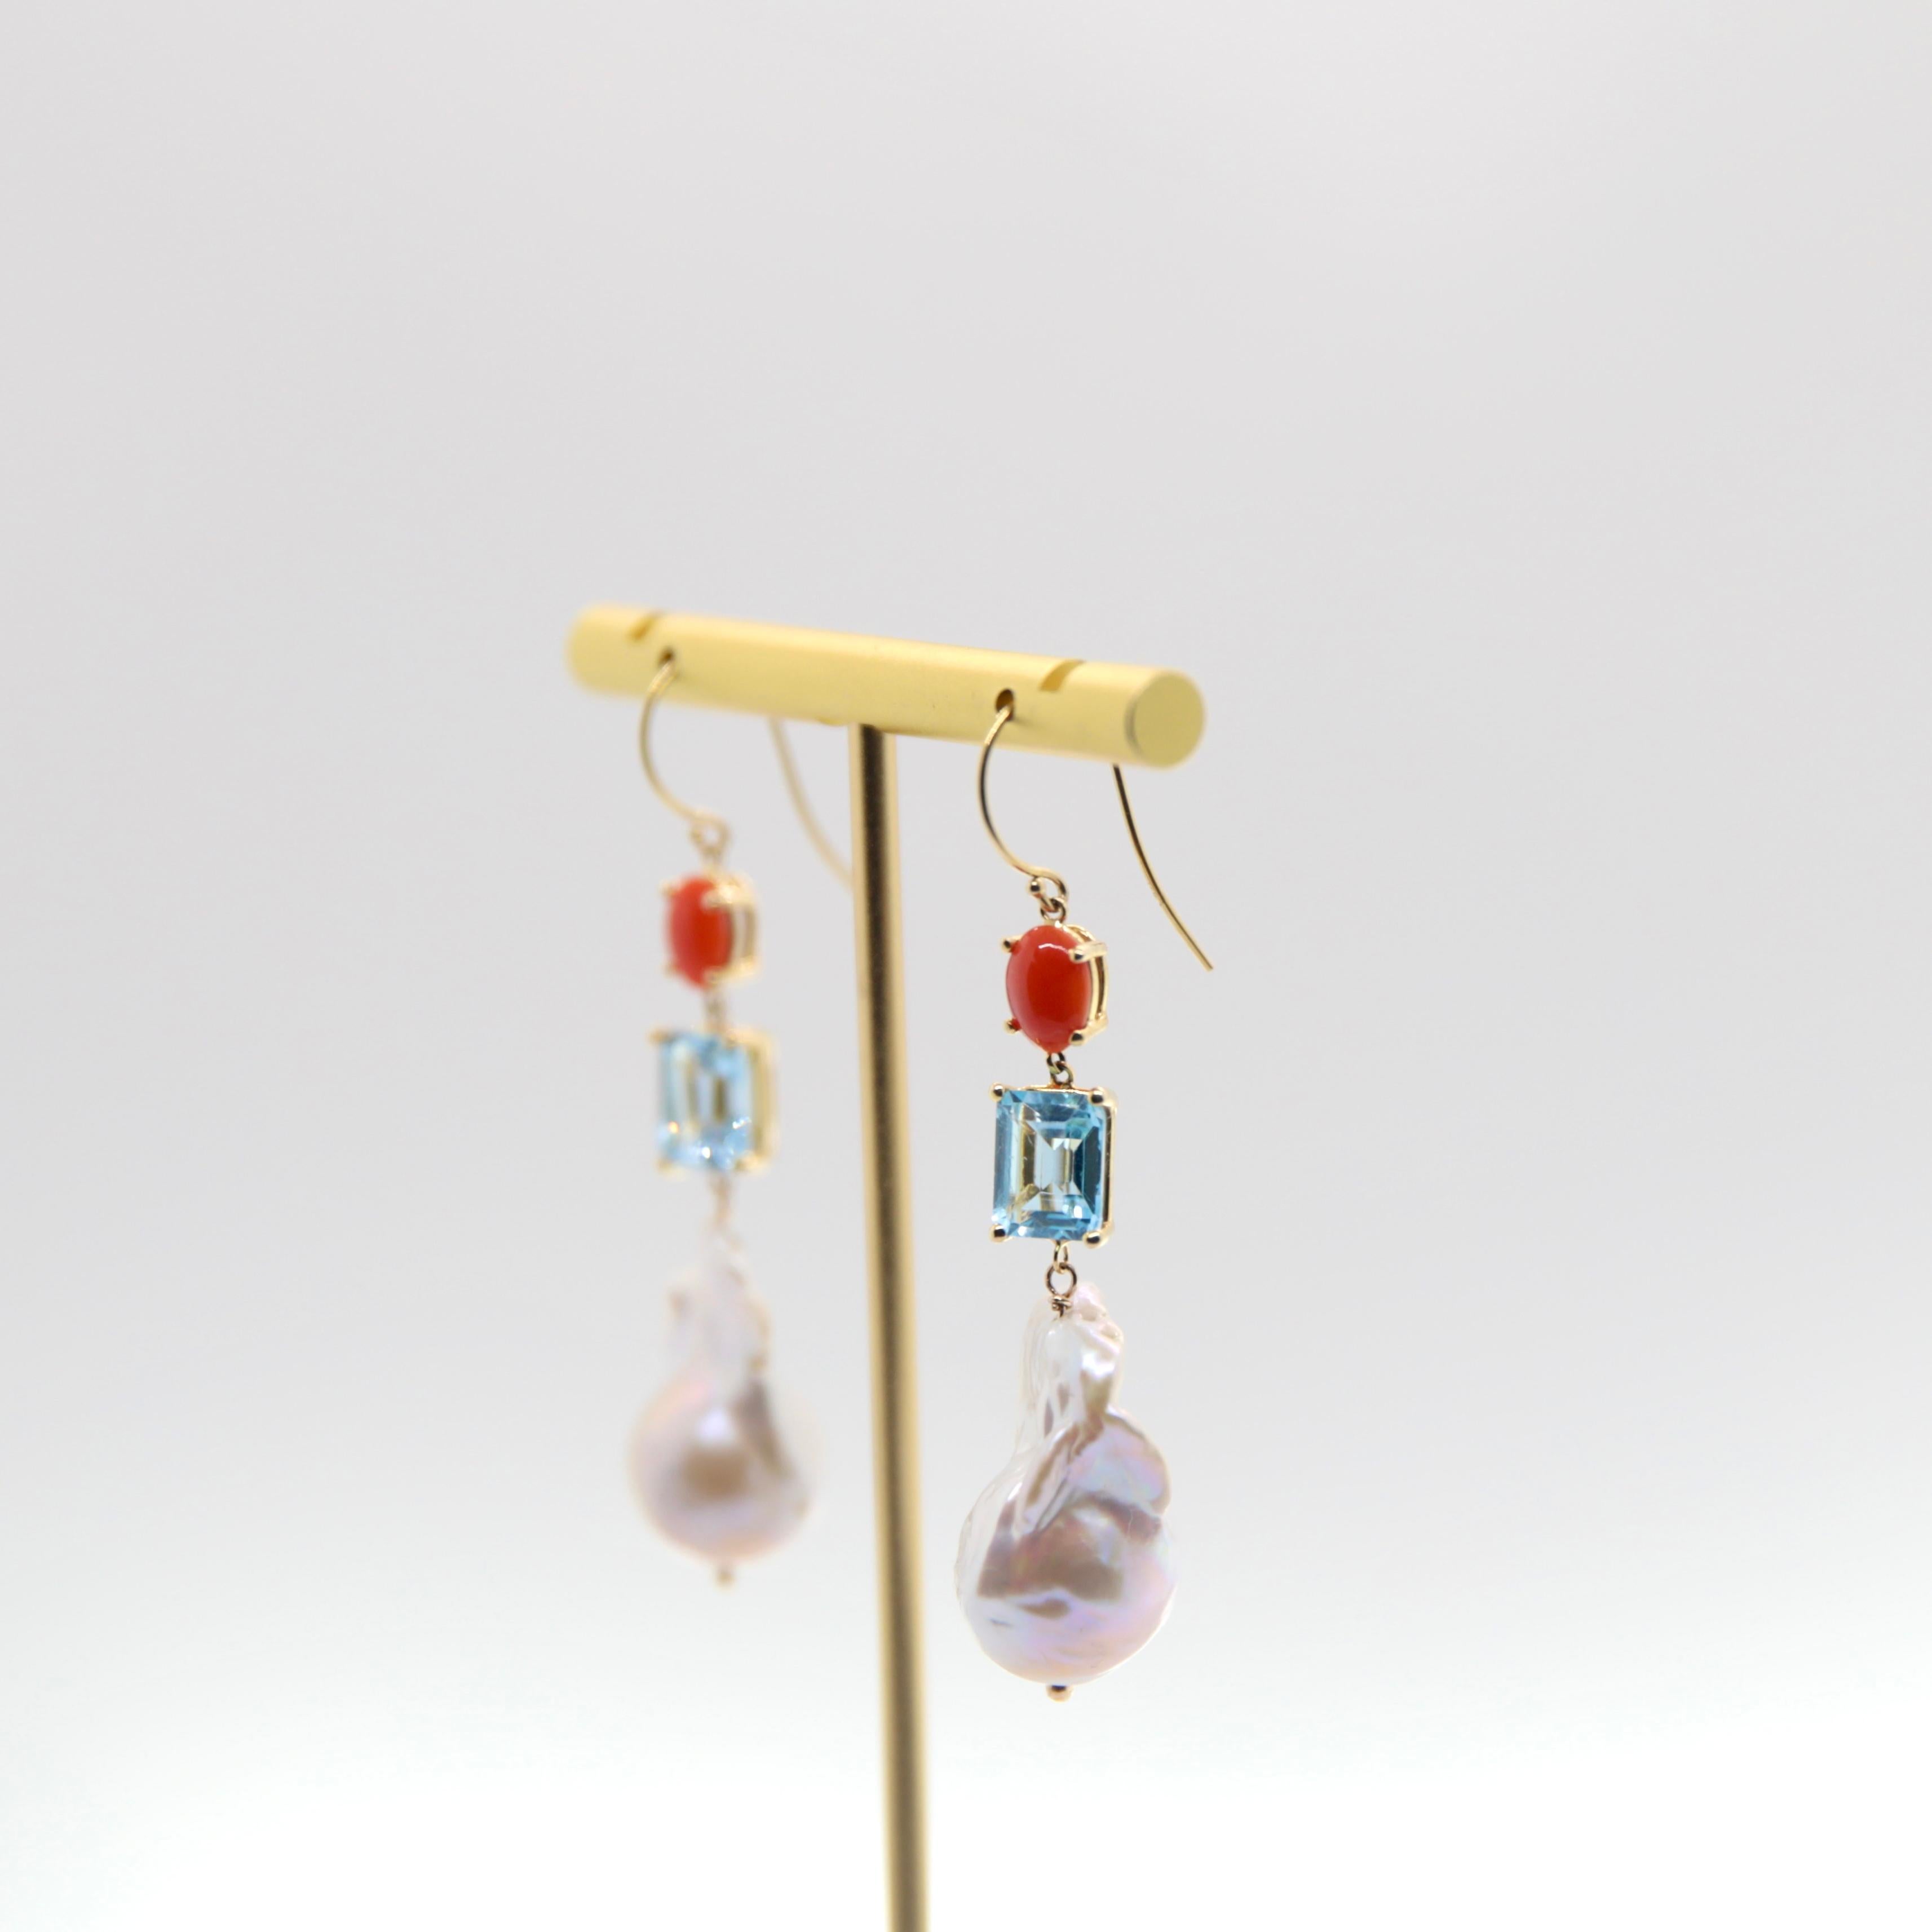 - Suspended in a 14k yellow gold fish hook

- 6x4 mm coral set in a 4 prong setting 

- 9 x 7 mm emerald cut blue tourmaline; approx 2.70 ct / each: 5.40 carat total weight.
   
- Set in a 14k yellow gold, 4 prong basket setting

Blue Tourmaline is